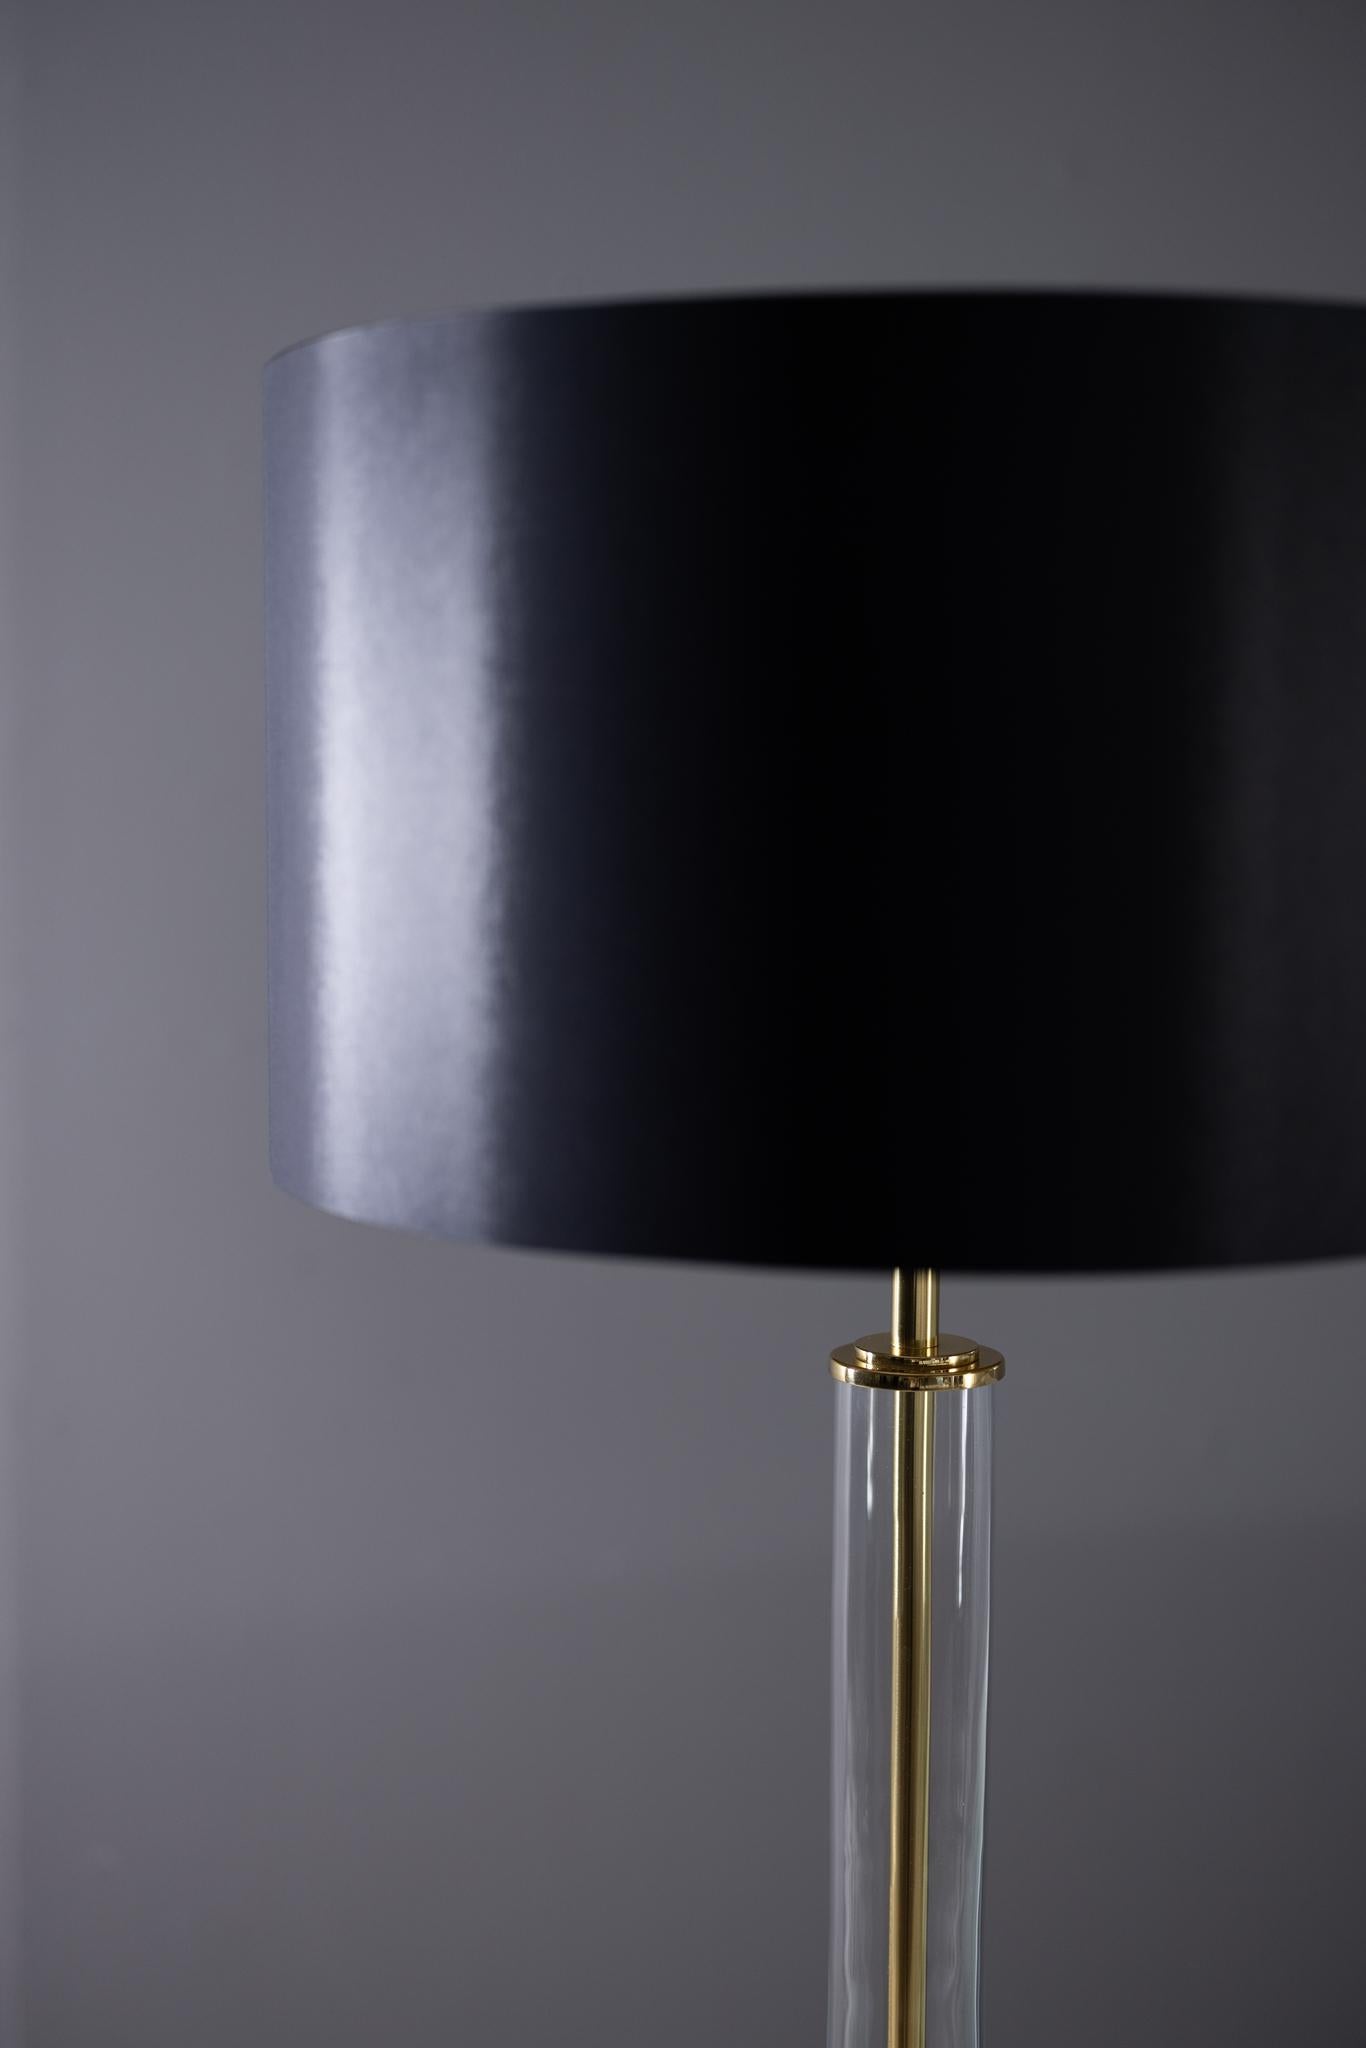 Set of 2 Art Deco Table Lamps, Vaz Table Lamp, Black Shade, Handmade in Portugal For Sale 4